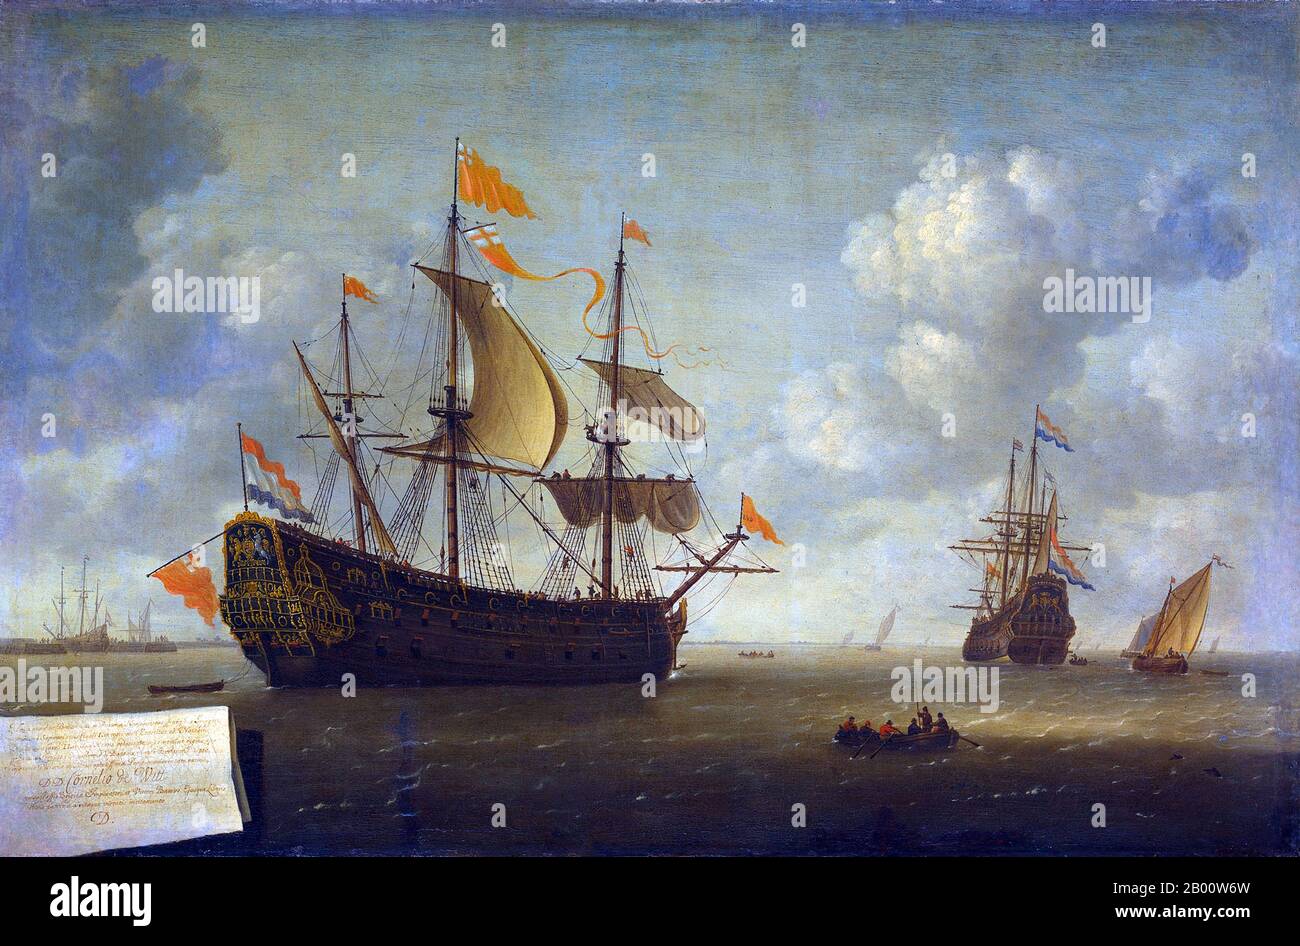 Maritime: 'The Arrival of the Royal Charles'. Oil on canvas painting by Jeronymus van Diest II (1631-1687), 1667.  The Raid on the Medway, sometimes called the Battle of Medway or the Battle of Chatham, was a successful Dutch attack on the largest English naval ships, laid up in the dockyards of their main naval base Chatham, that took place in June 1667 during the Second Anglo-Dutch War. The Dutch, under nominal command of Lieutenant-Admiral Michiel de Ruyter, bombarded and then captured the town of Sheerness, sailed up the River Thames to Gravesend, then up the River Medway to Chatham. Stock Photo